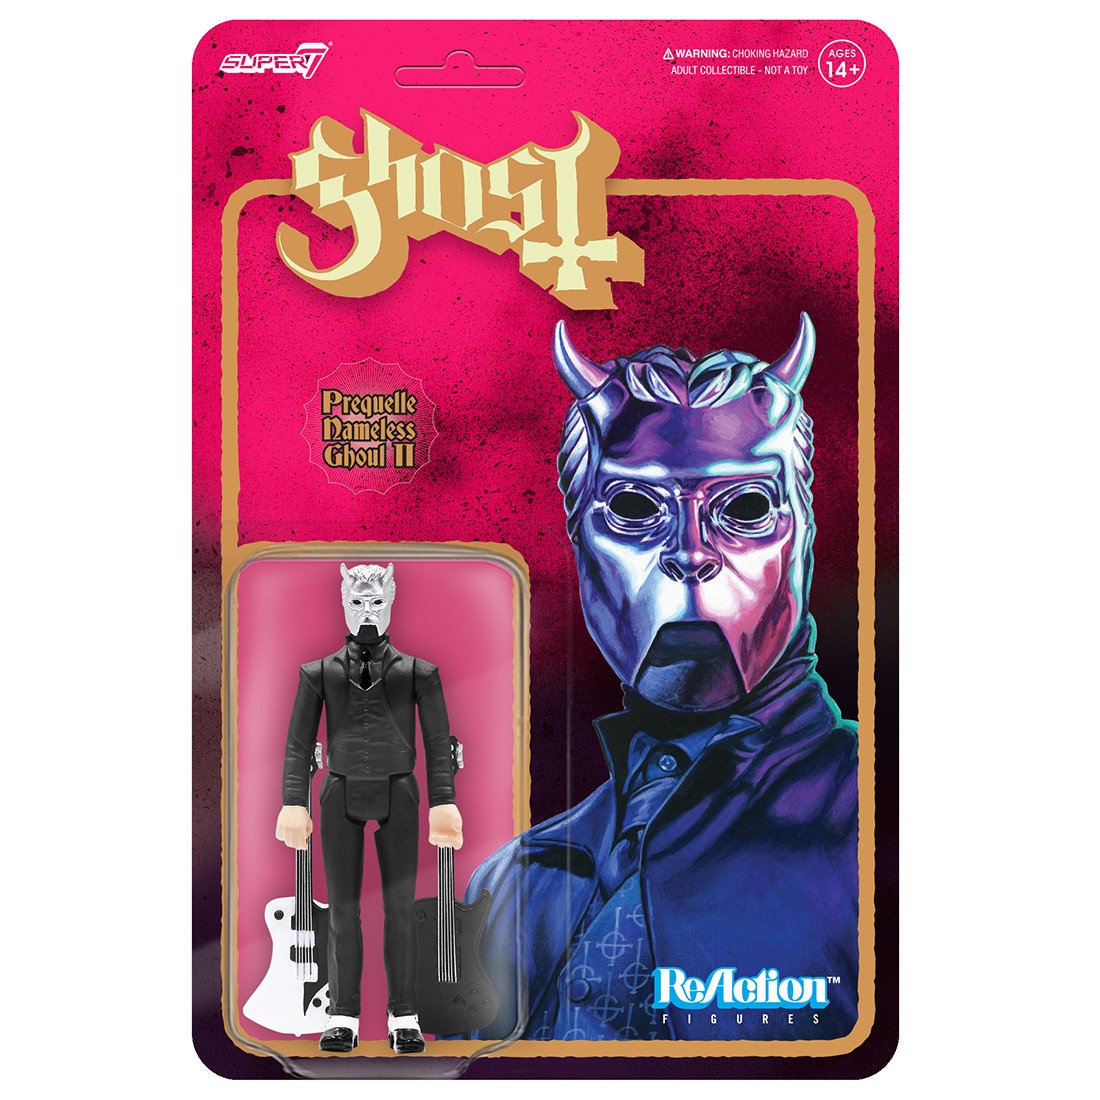 Super7 x Ghost Reaction Figure - Prequelle Nameless Ghoul Guitars (black / red)